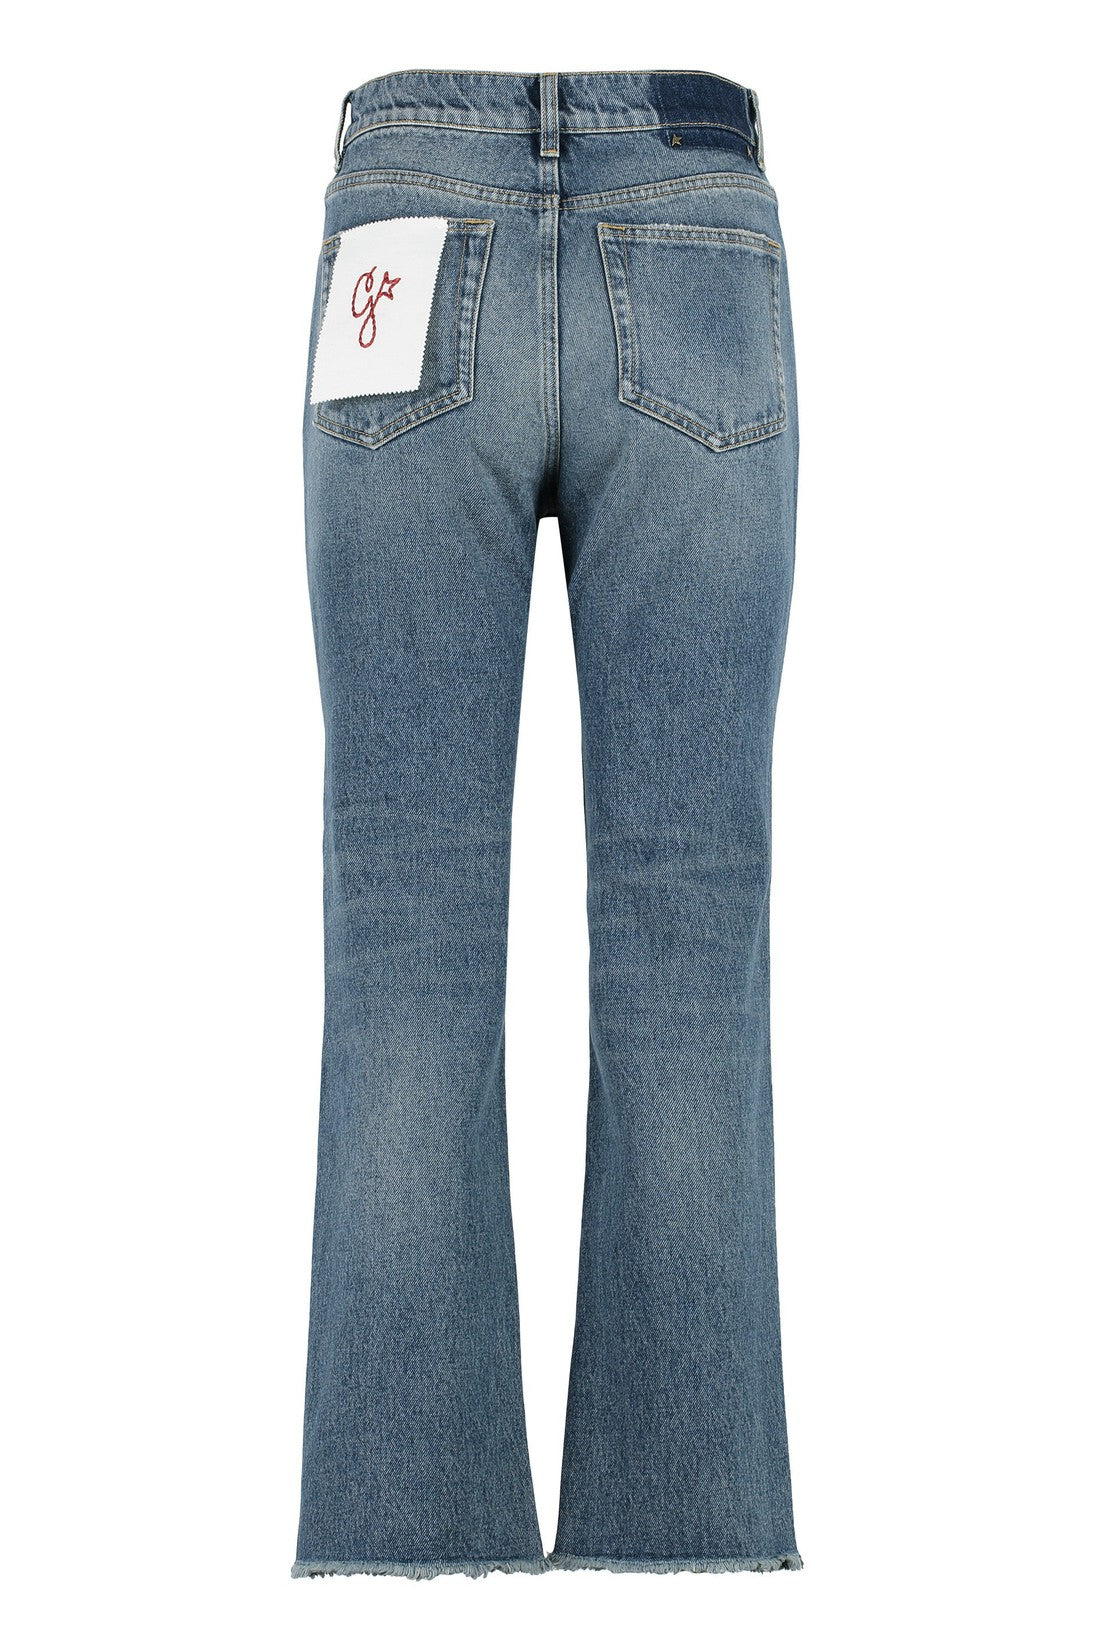 Golden Goose-OUTLET-SALE-Embroidered patch cropped jeans-ARCHIVIST